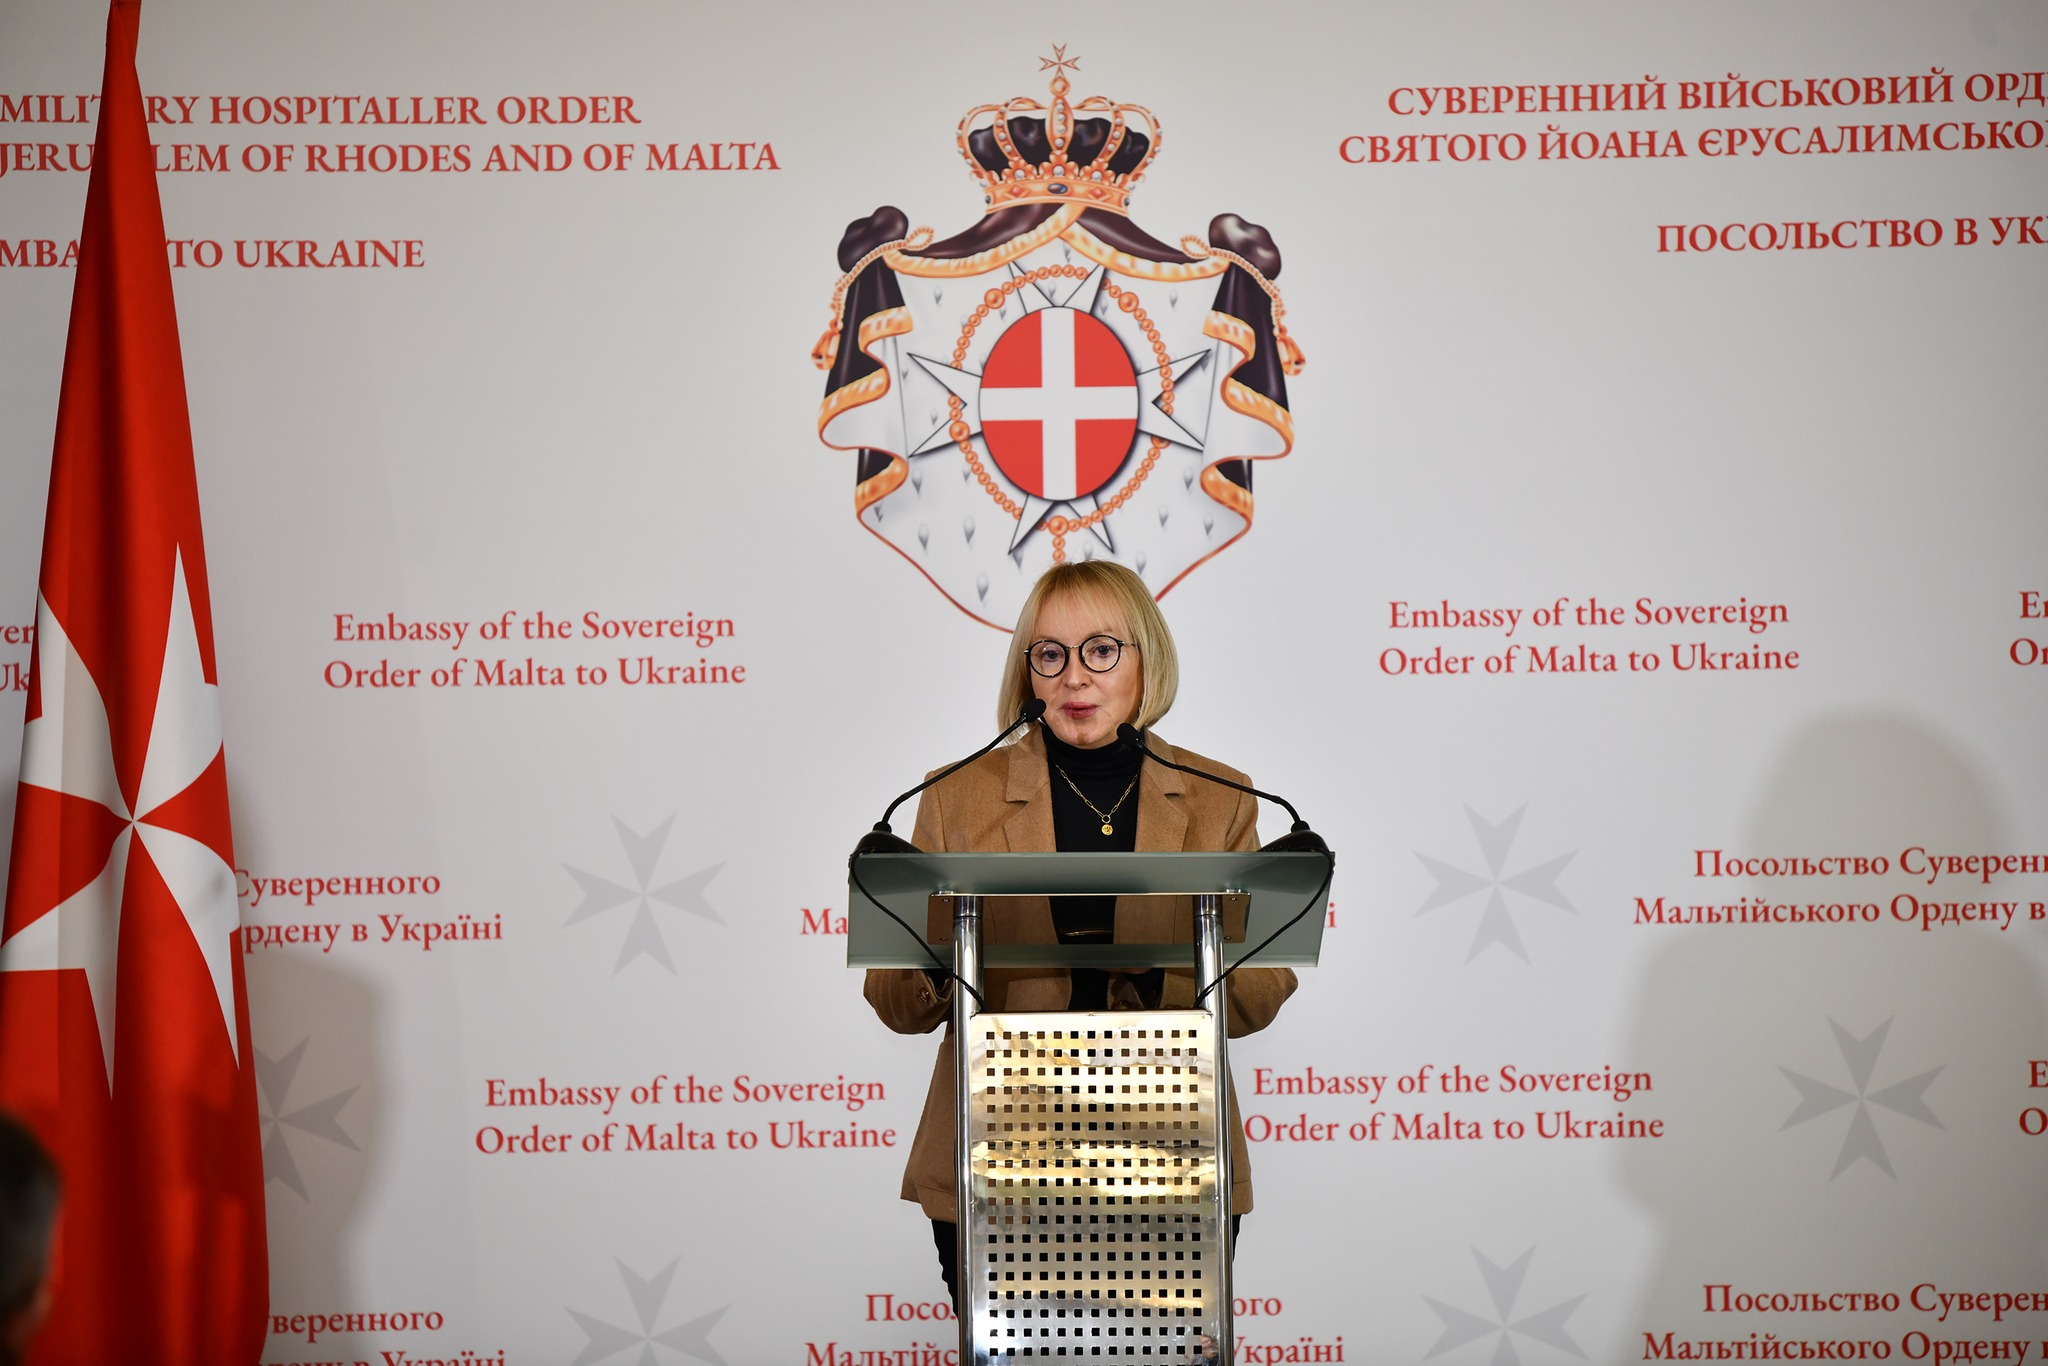 The Sovereign Order of Malta celebrates 15 years of diplomatic relations with Ukraine